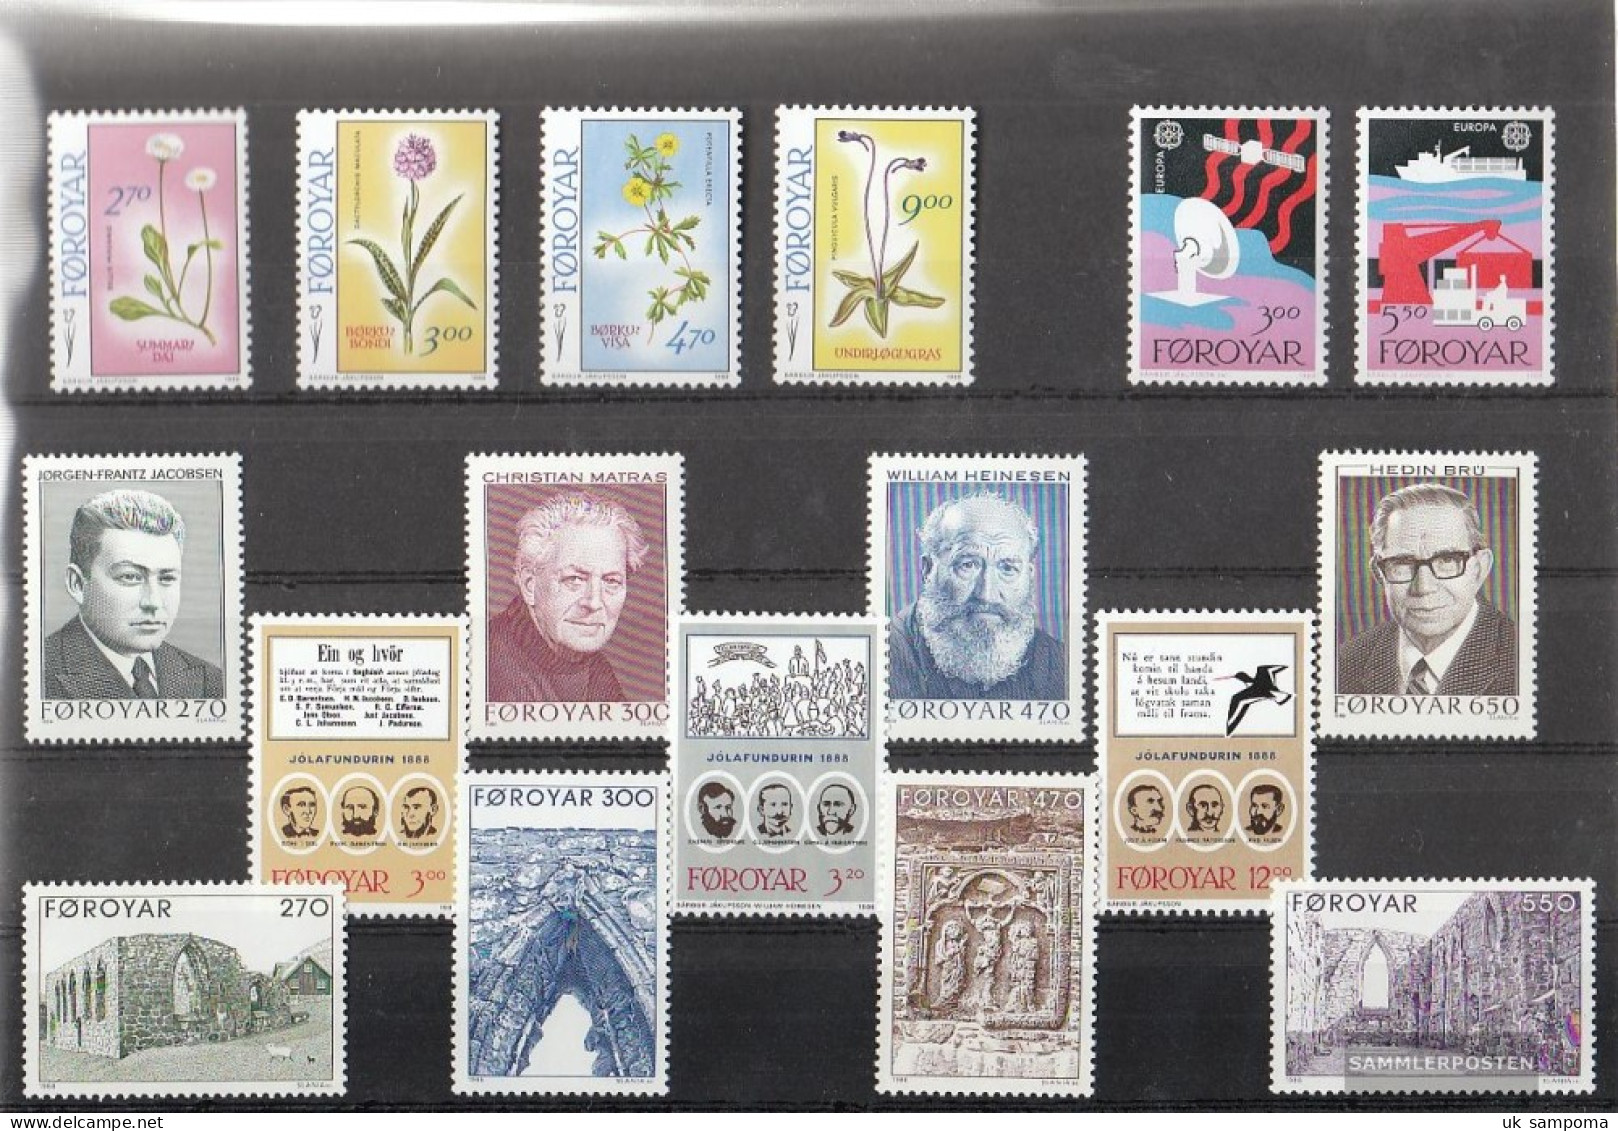 Denmark - Faroe Islands Unmounted Mint / Never Hinged 1988 Complete Volume In Clean Conservation - Full Years